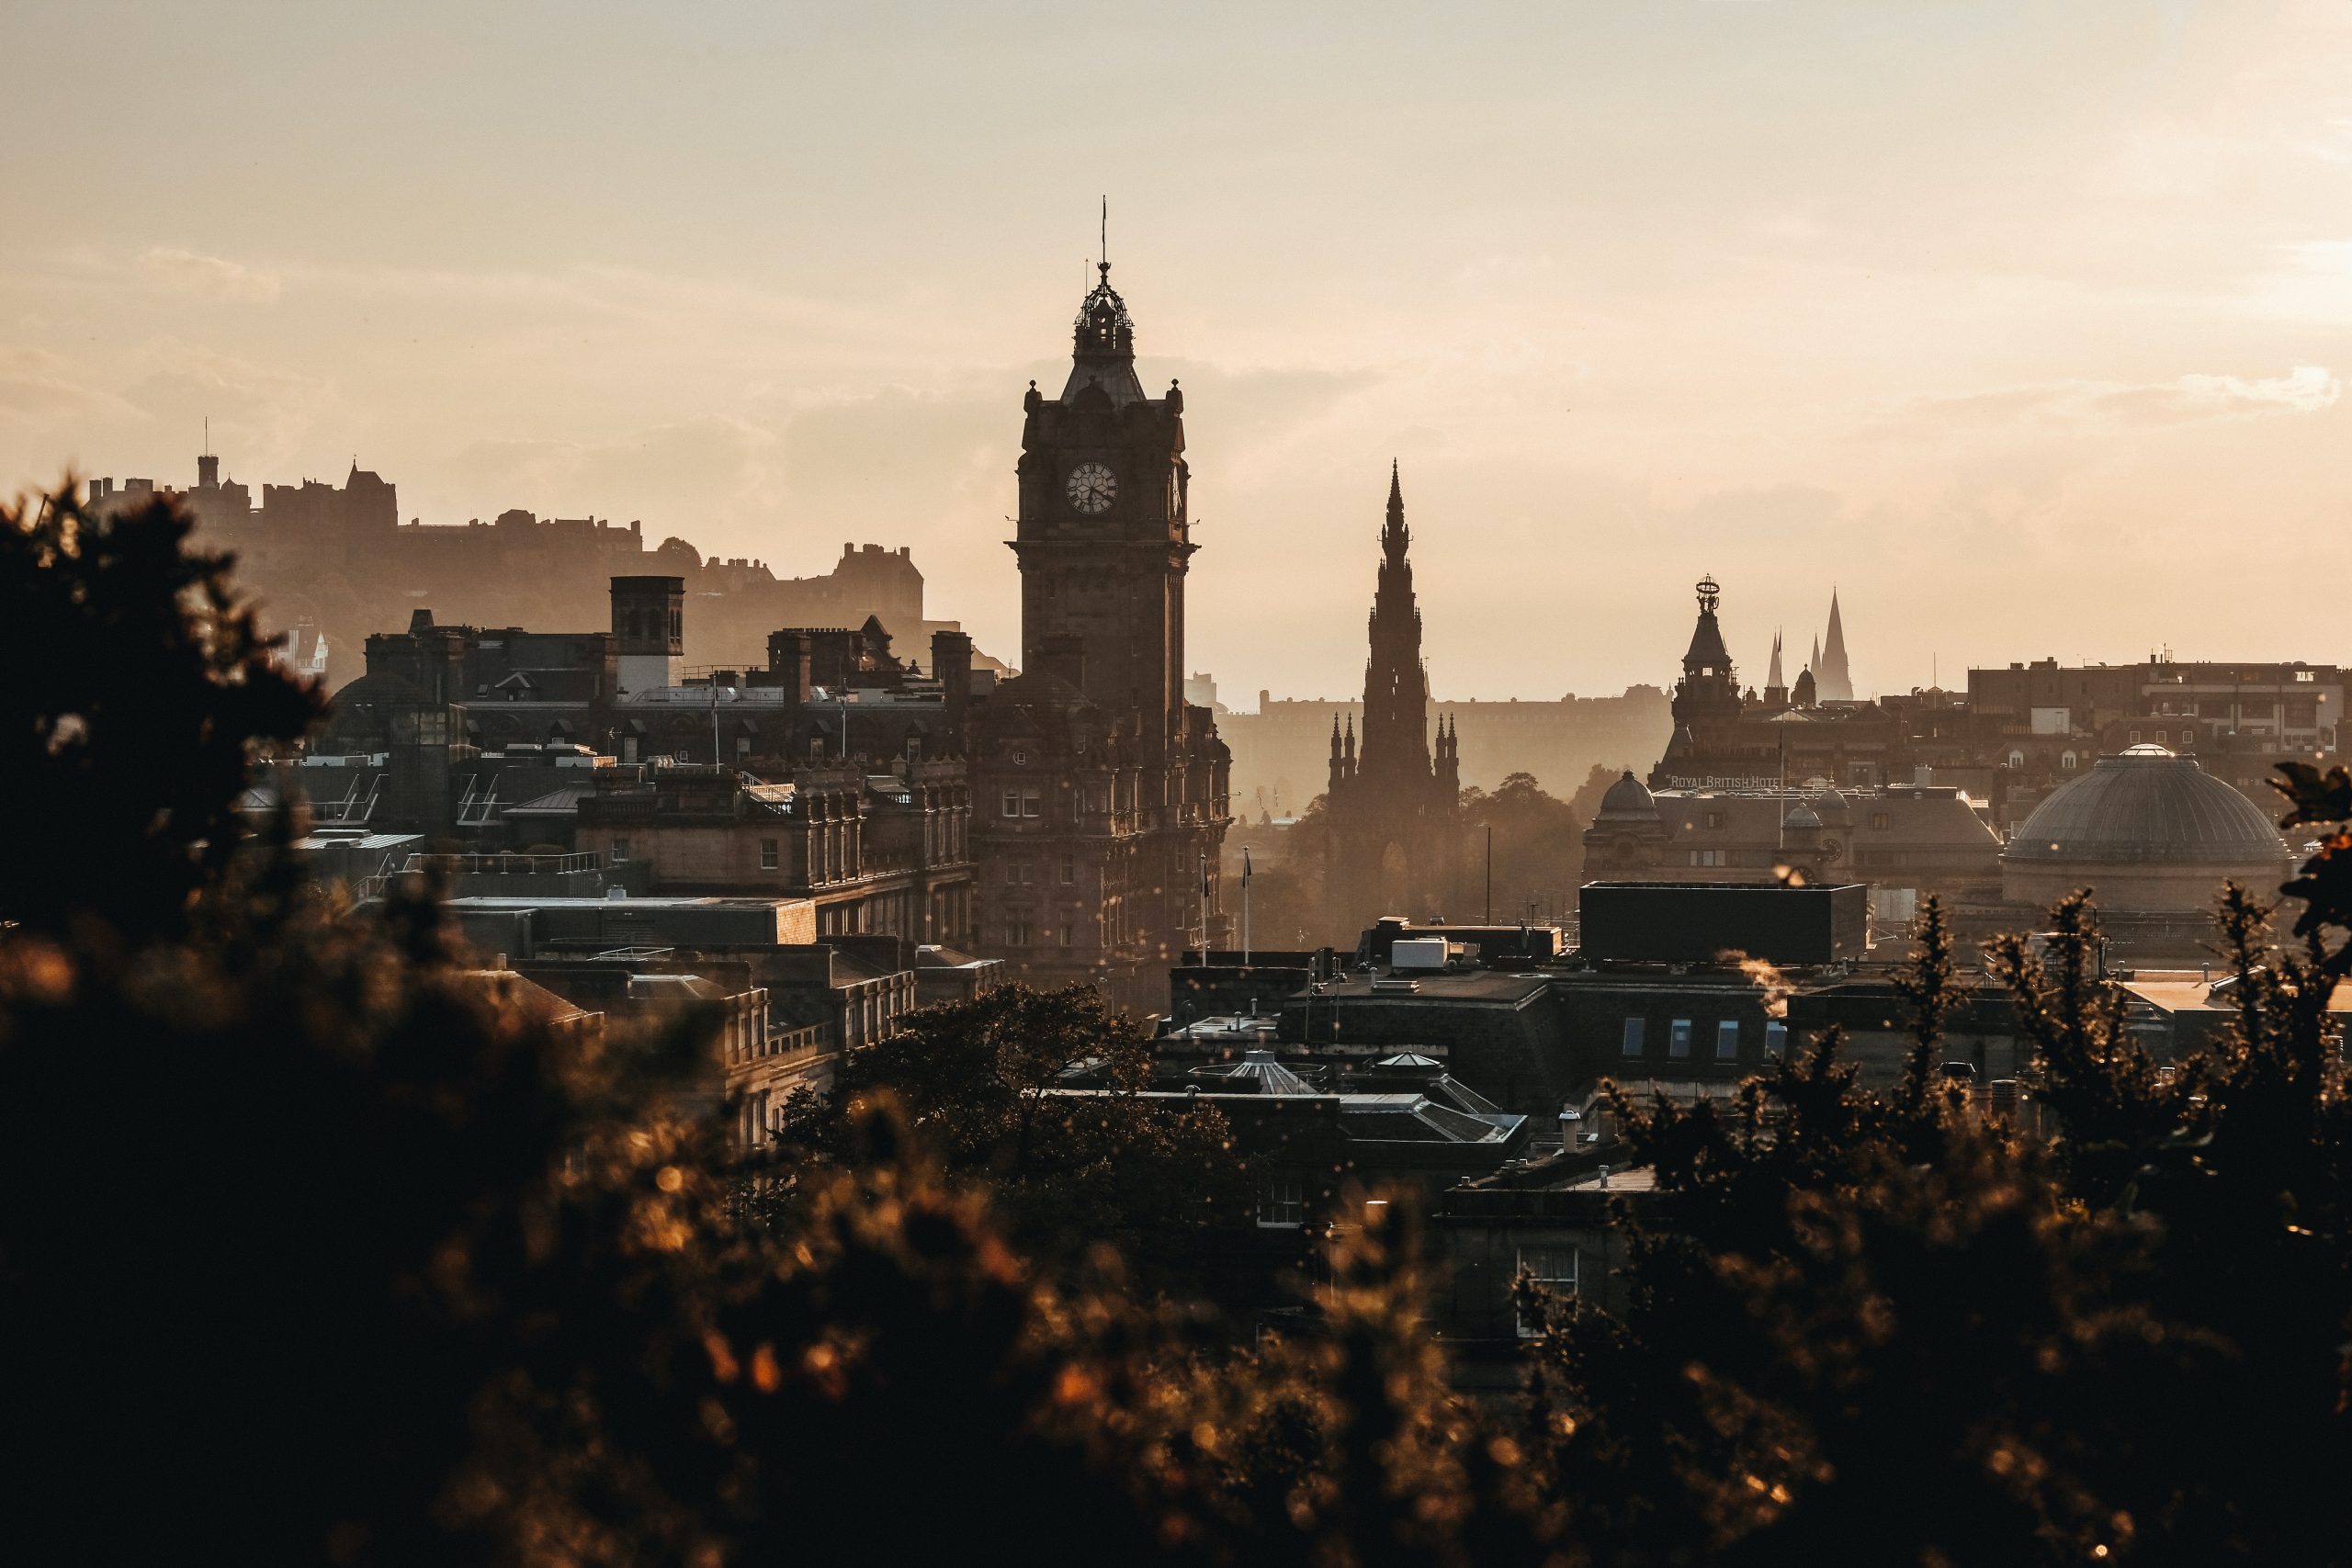 How To Spend Your Time In Edinburgh